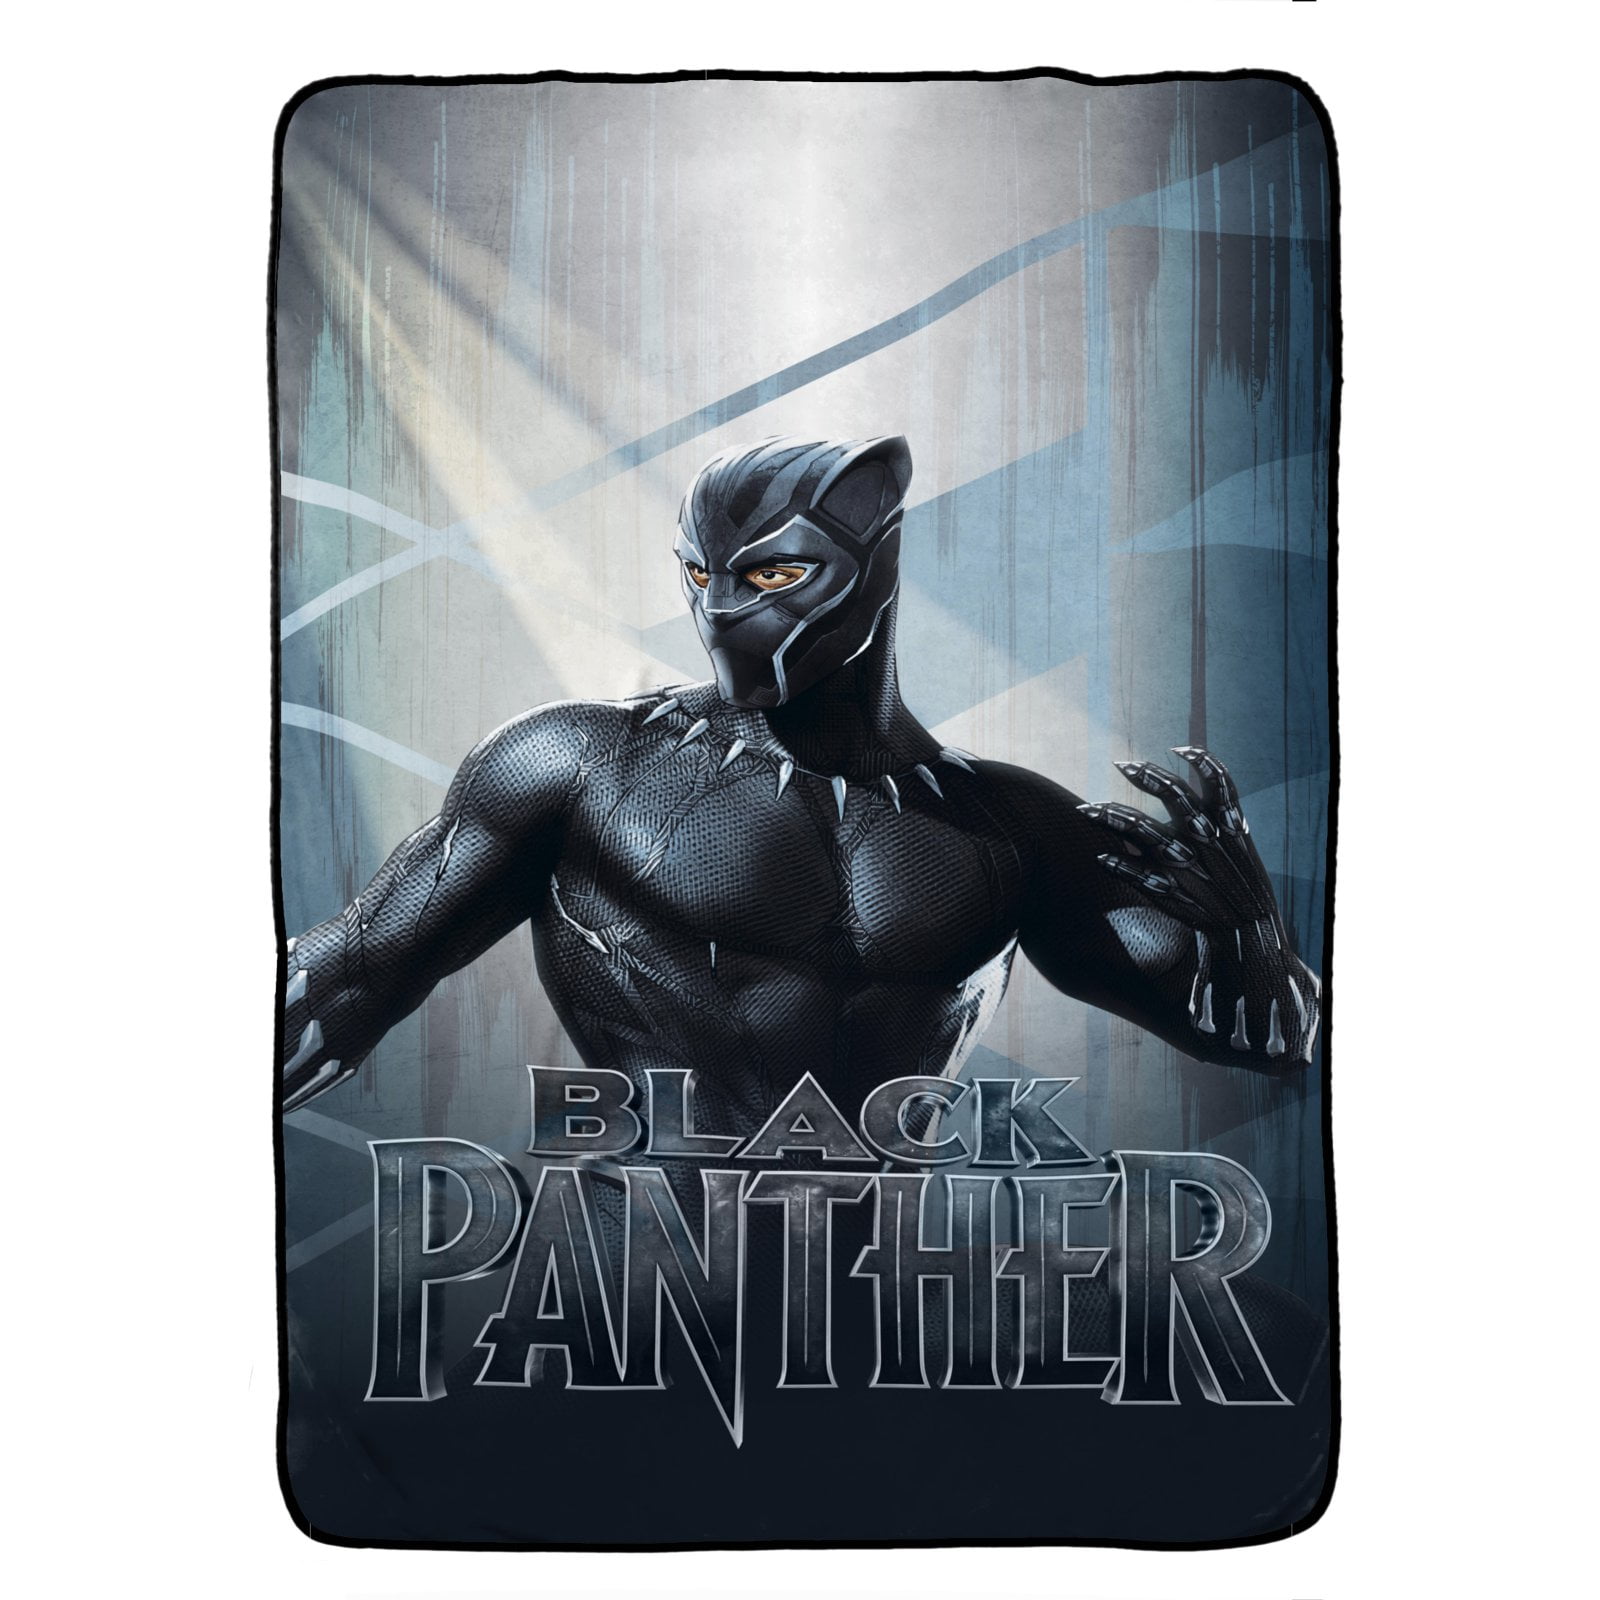 3D BLACK PANTHER FAUX FUR ANIMAL FLEECE THROWS Over Sofa Bed Blanket Soft & Warm